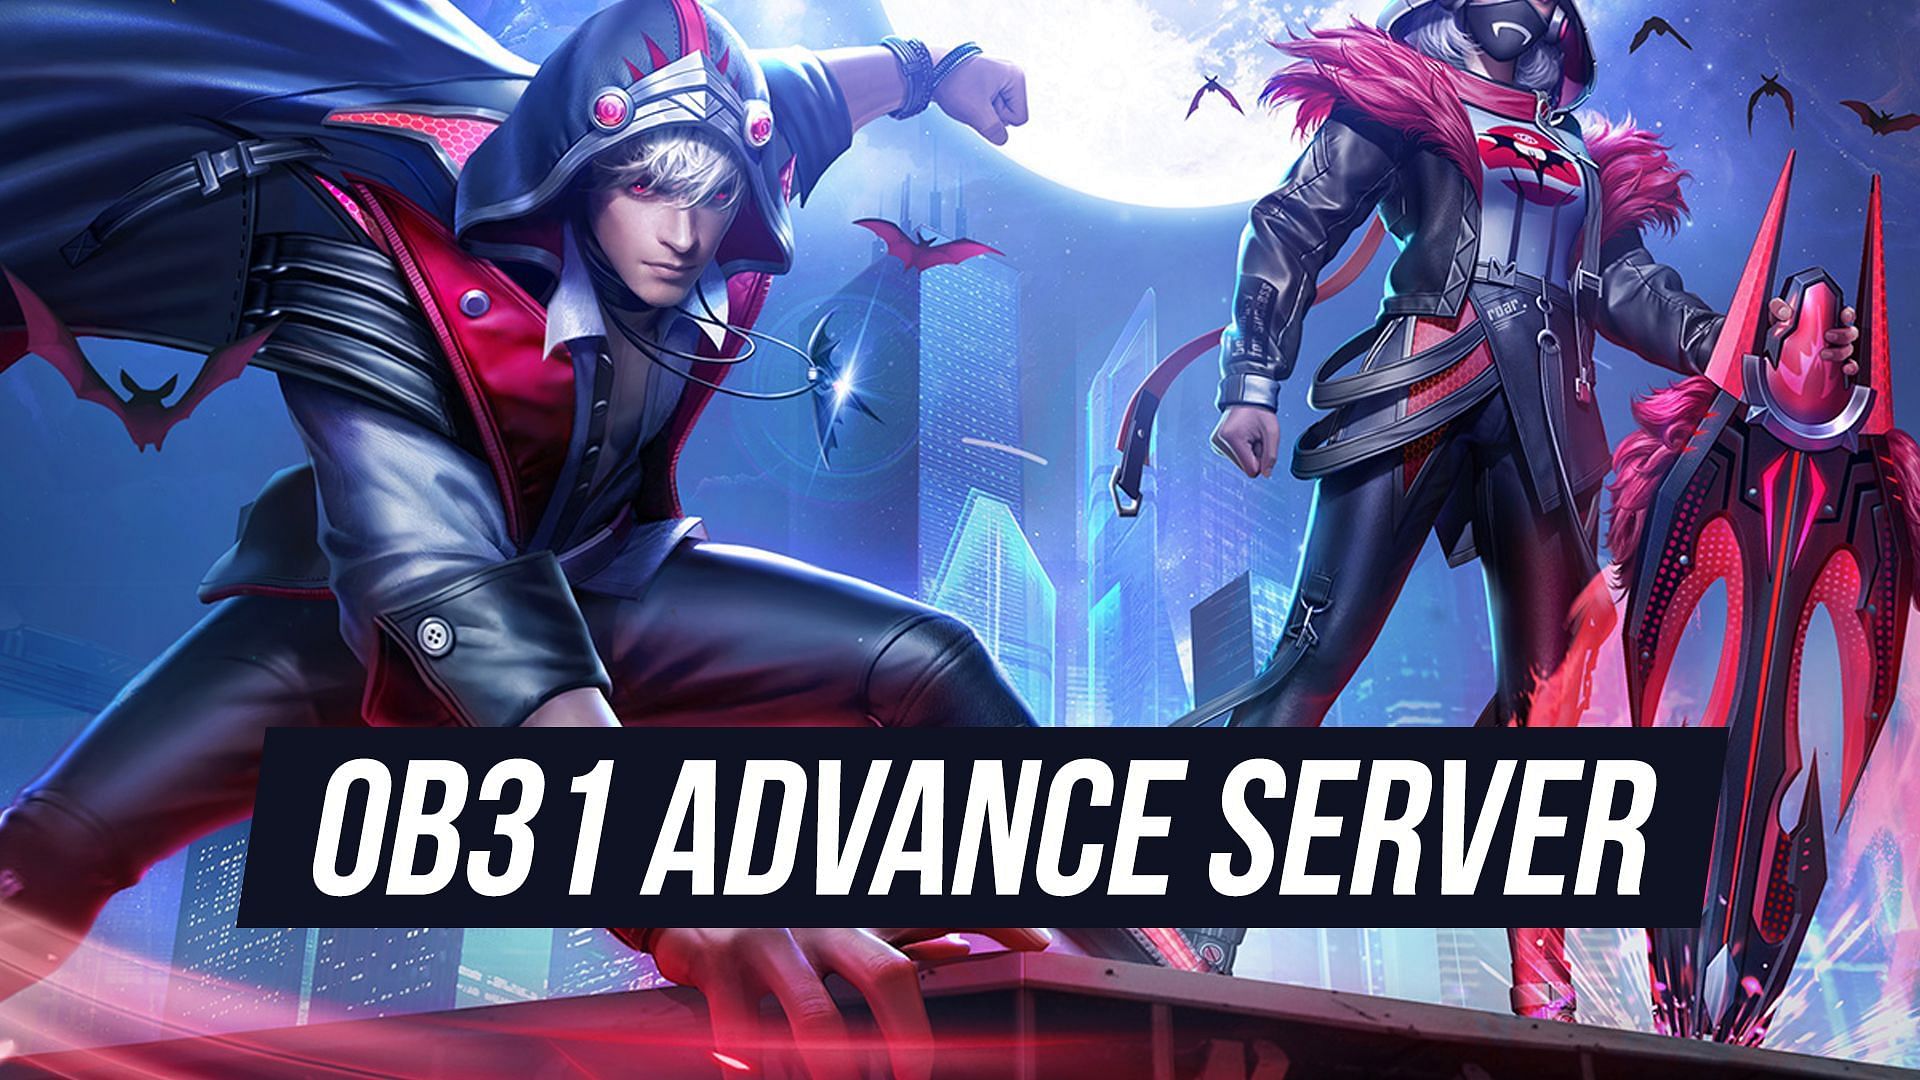 The Advance Server for Free Fire&rsquo;s OB31 update is arriving tomorrow (Image via Sportskeeda)